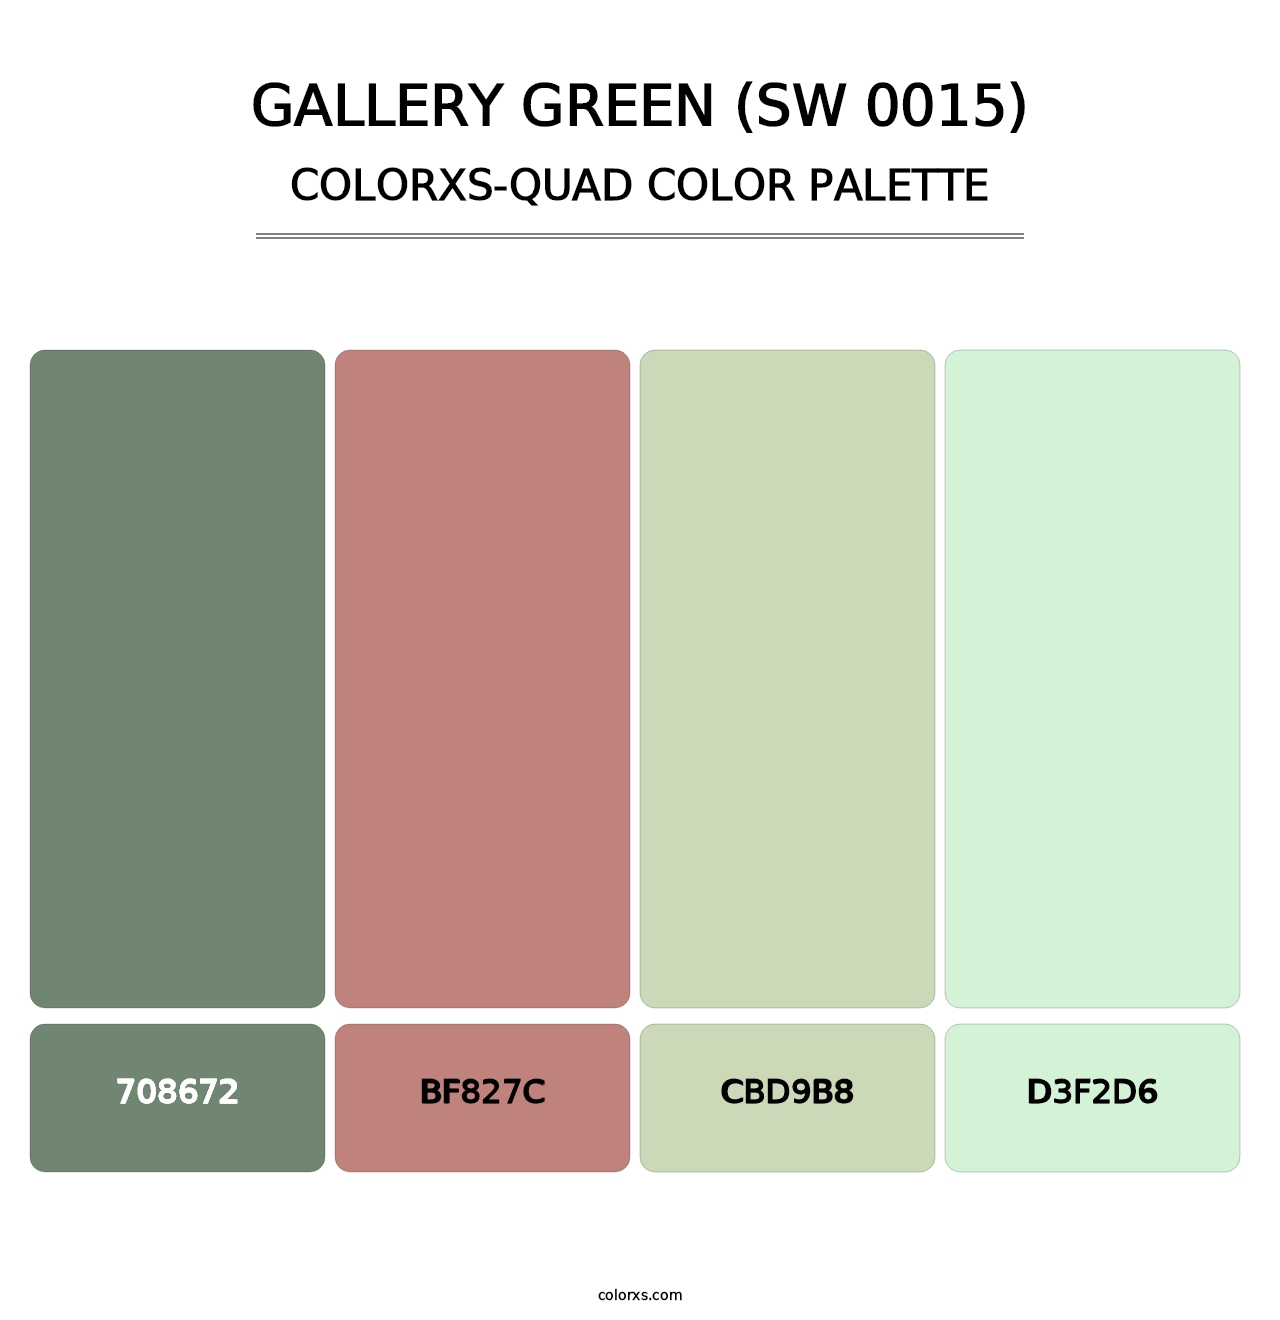 Gallery Green (SW 0015) - Colorxs Quad Palette